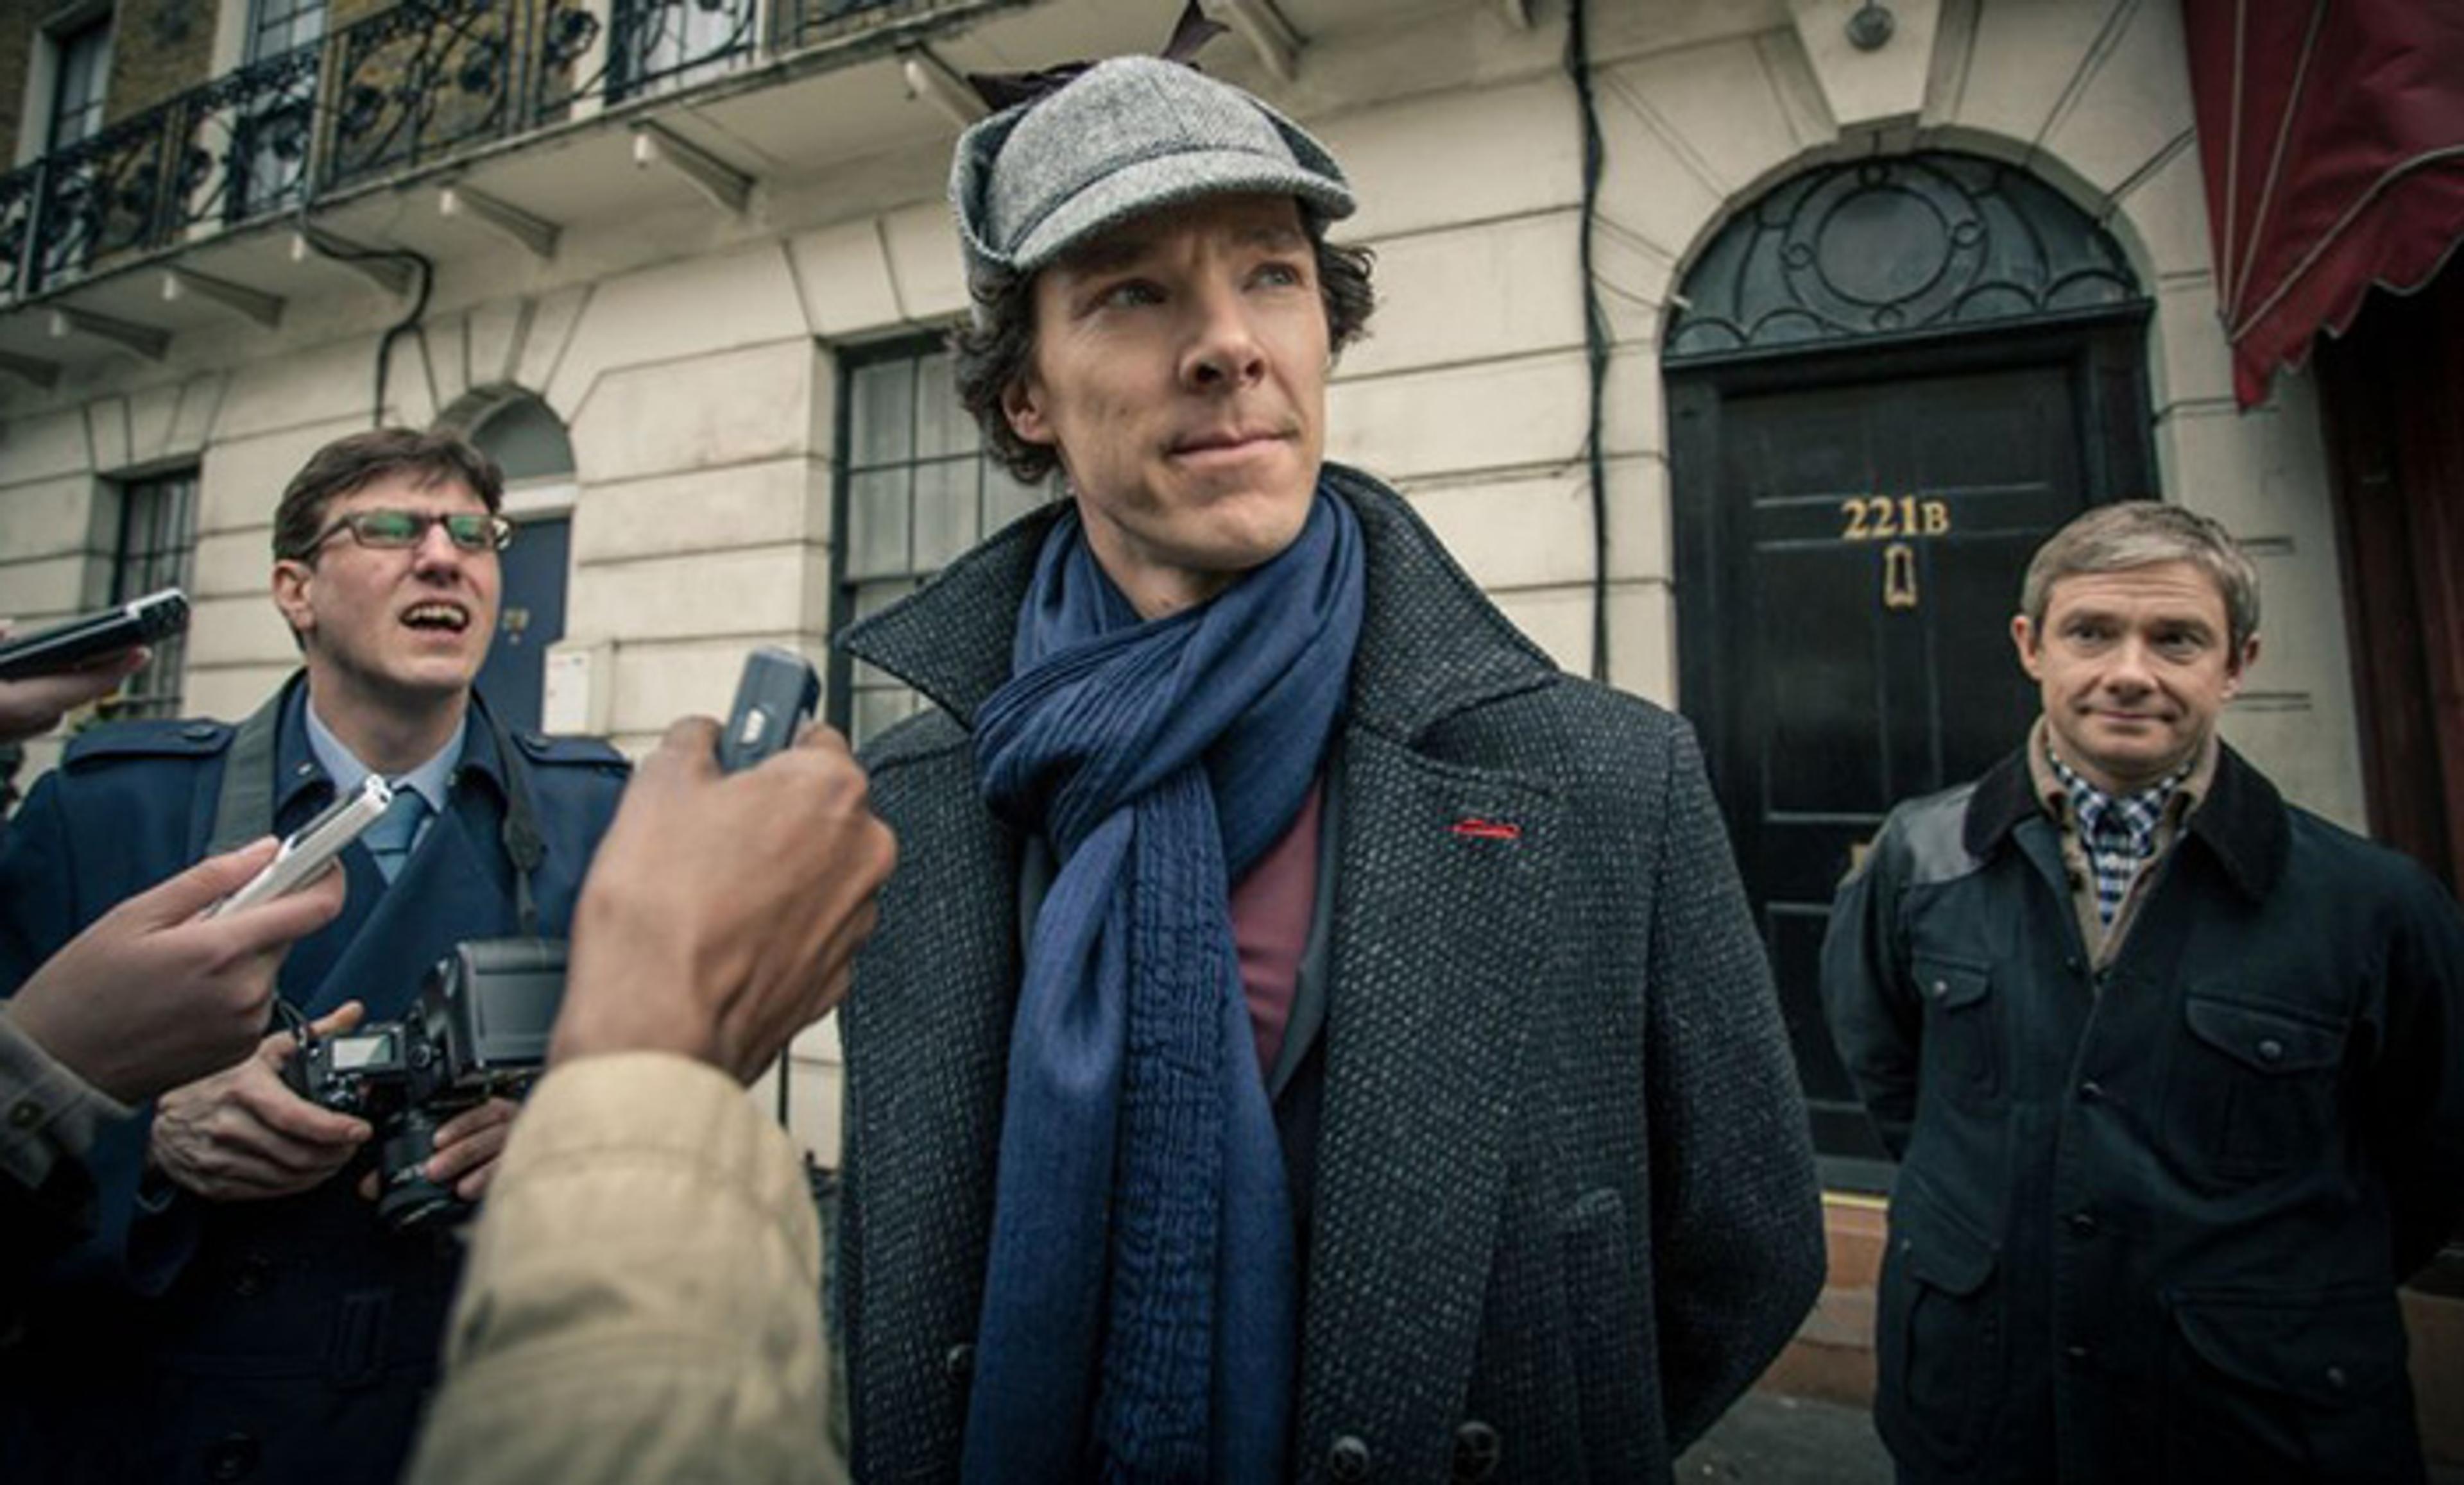 <p>Benedict Cumberbatch says playing Sherlock Holmes affects his off-screen persona. <em>Photo courtesy BBC/Hartswood Films</em></p>